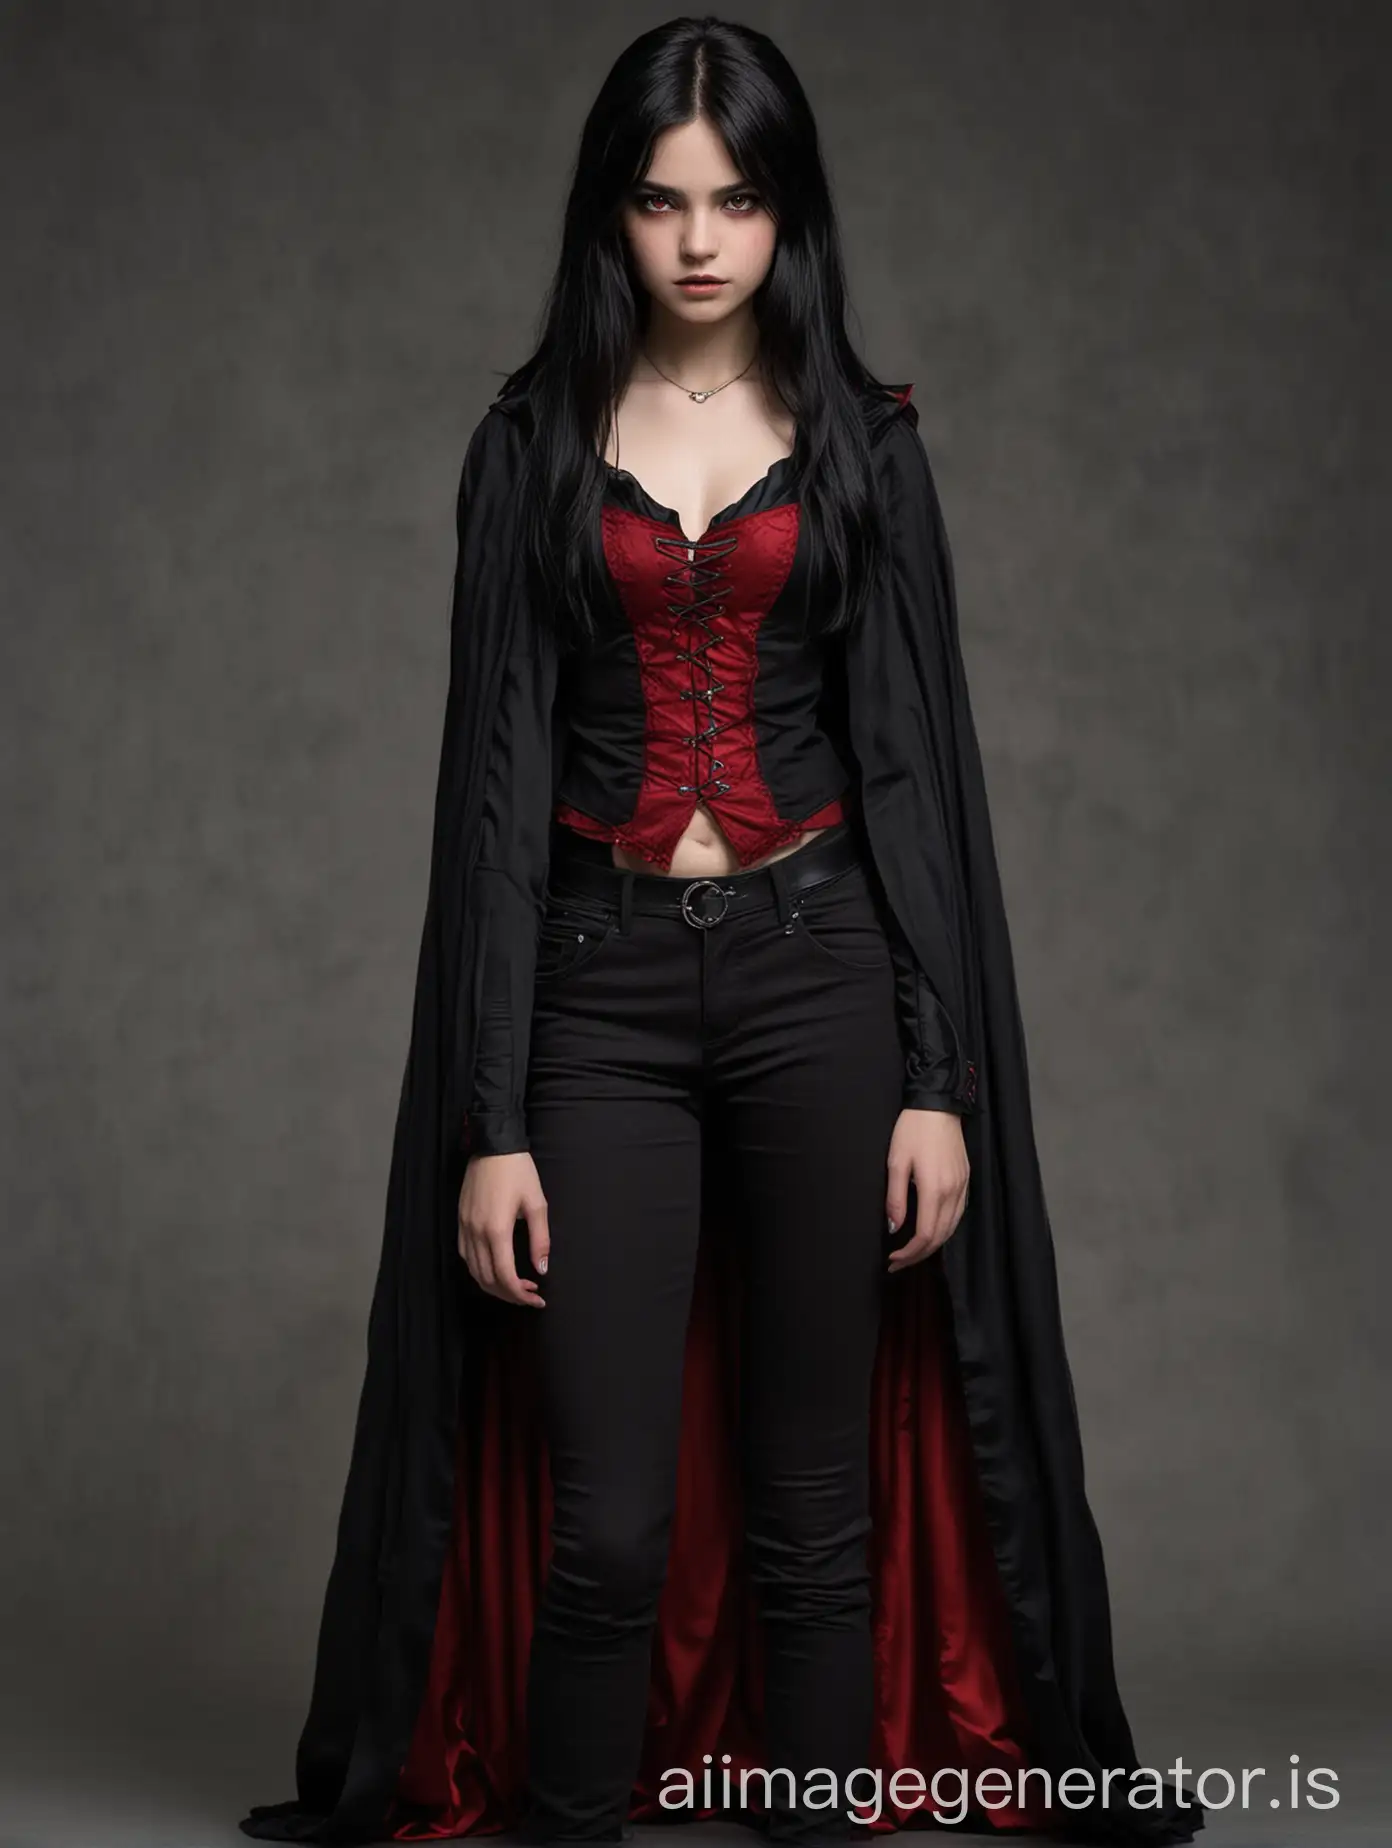 15 year old black haired vampire girl with red eyes wearing a black top, long cape that's red on the inside and black on the outside and black pants